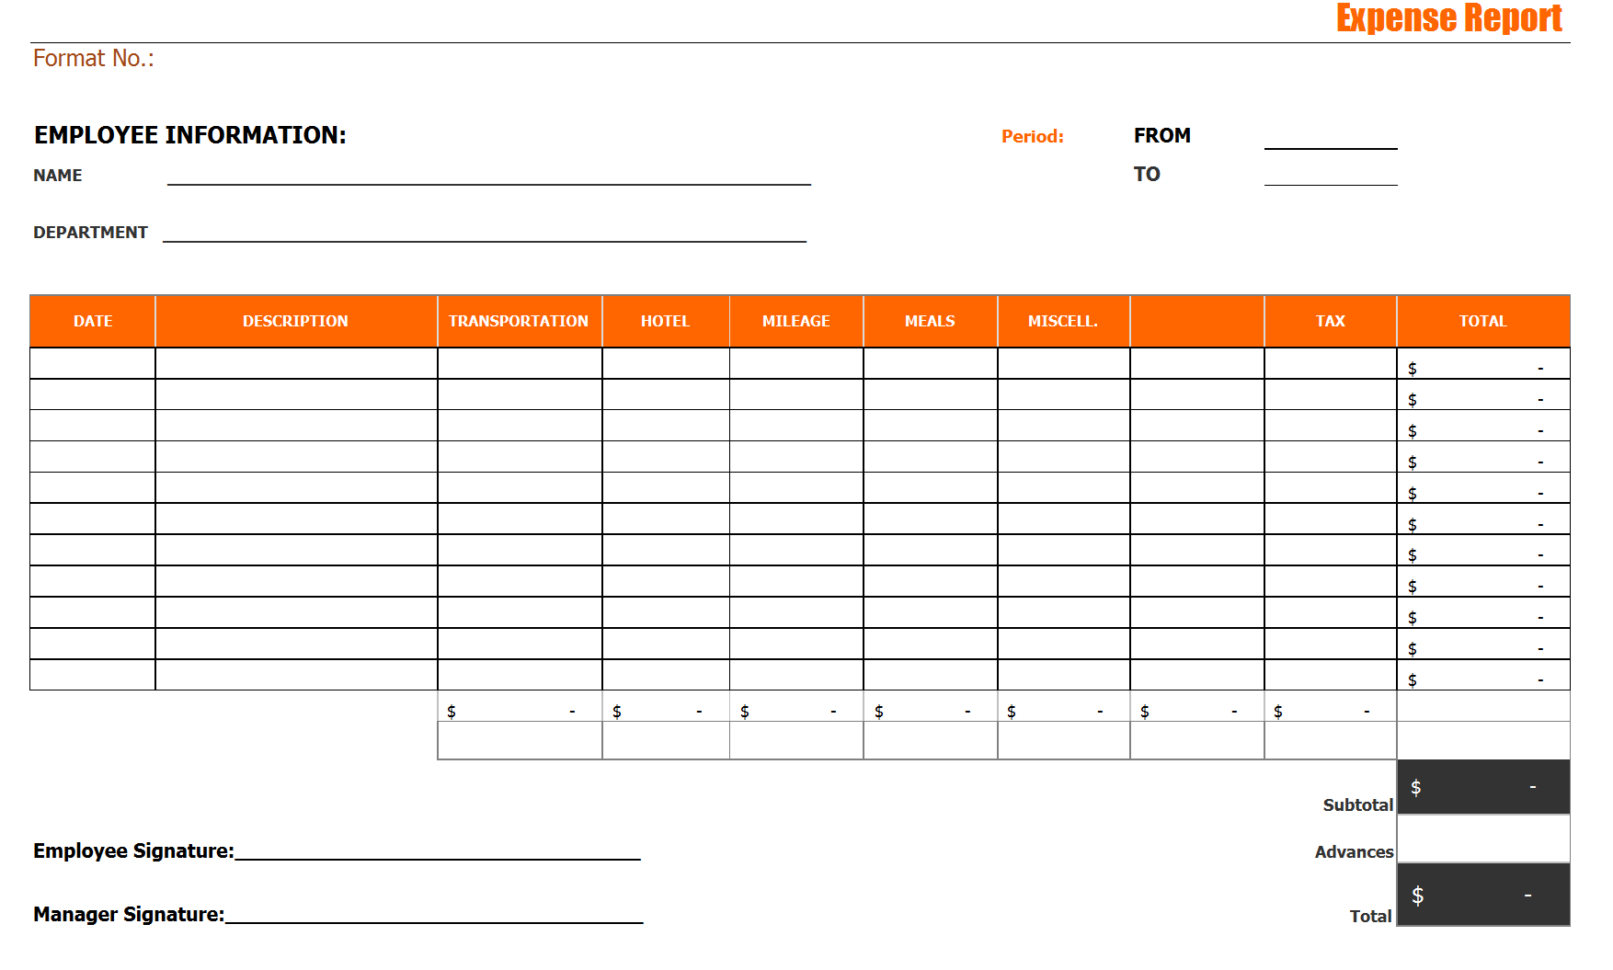 Office Expense Report Template - 28 Images - 8 Microsoft Office inside Office Expense Report